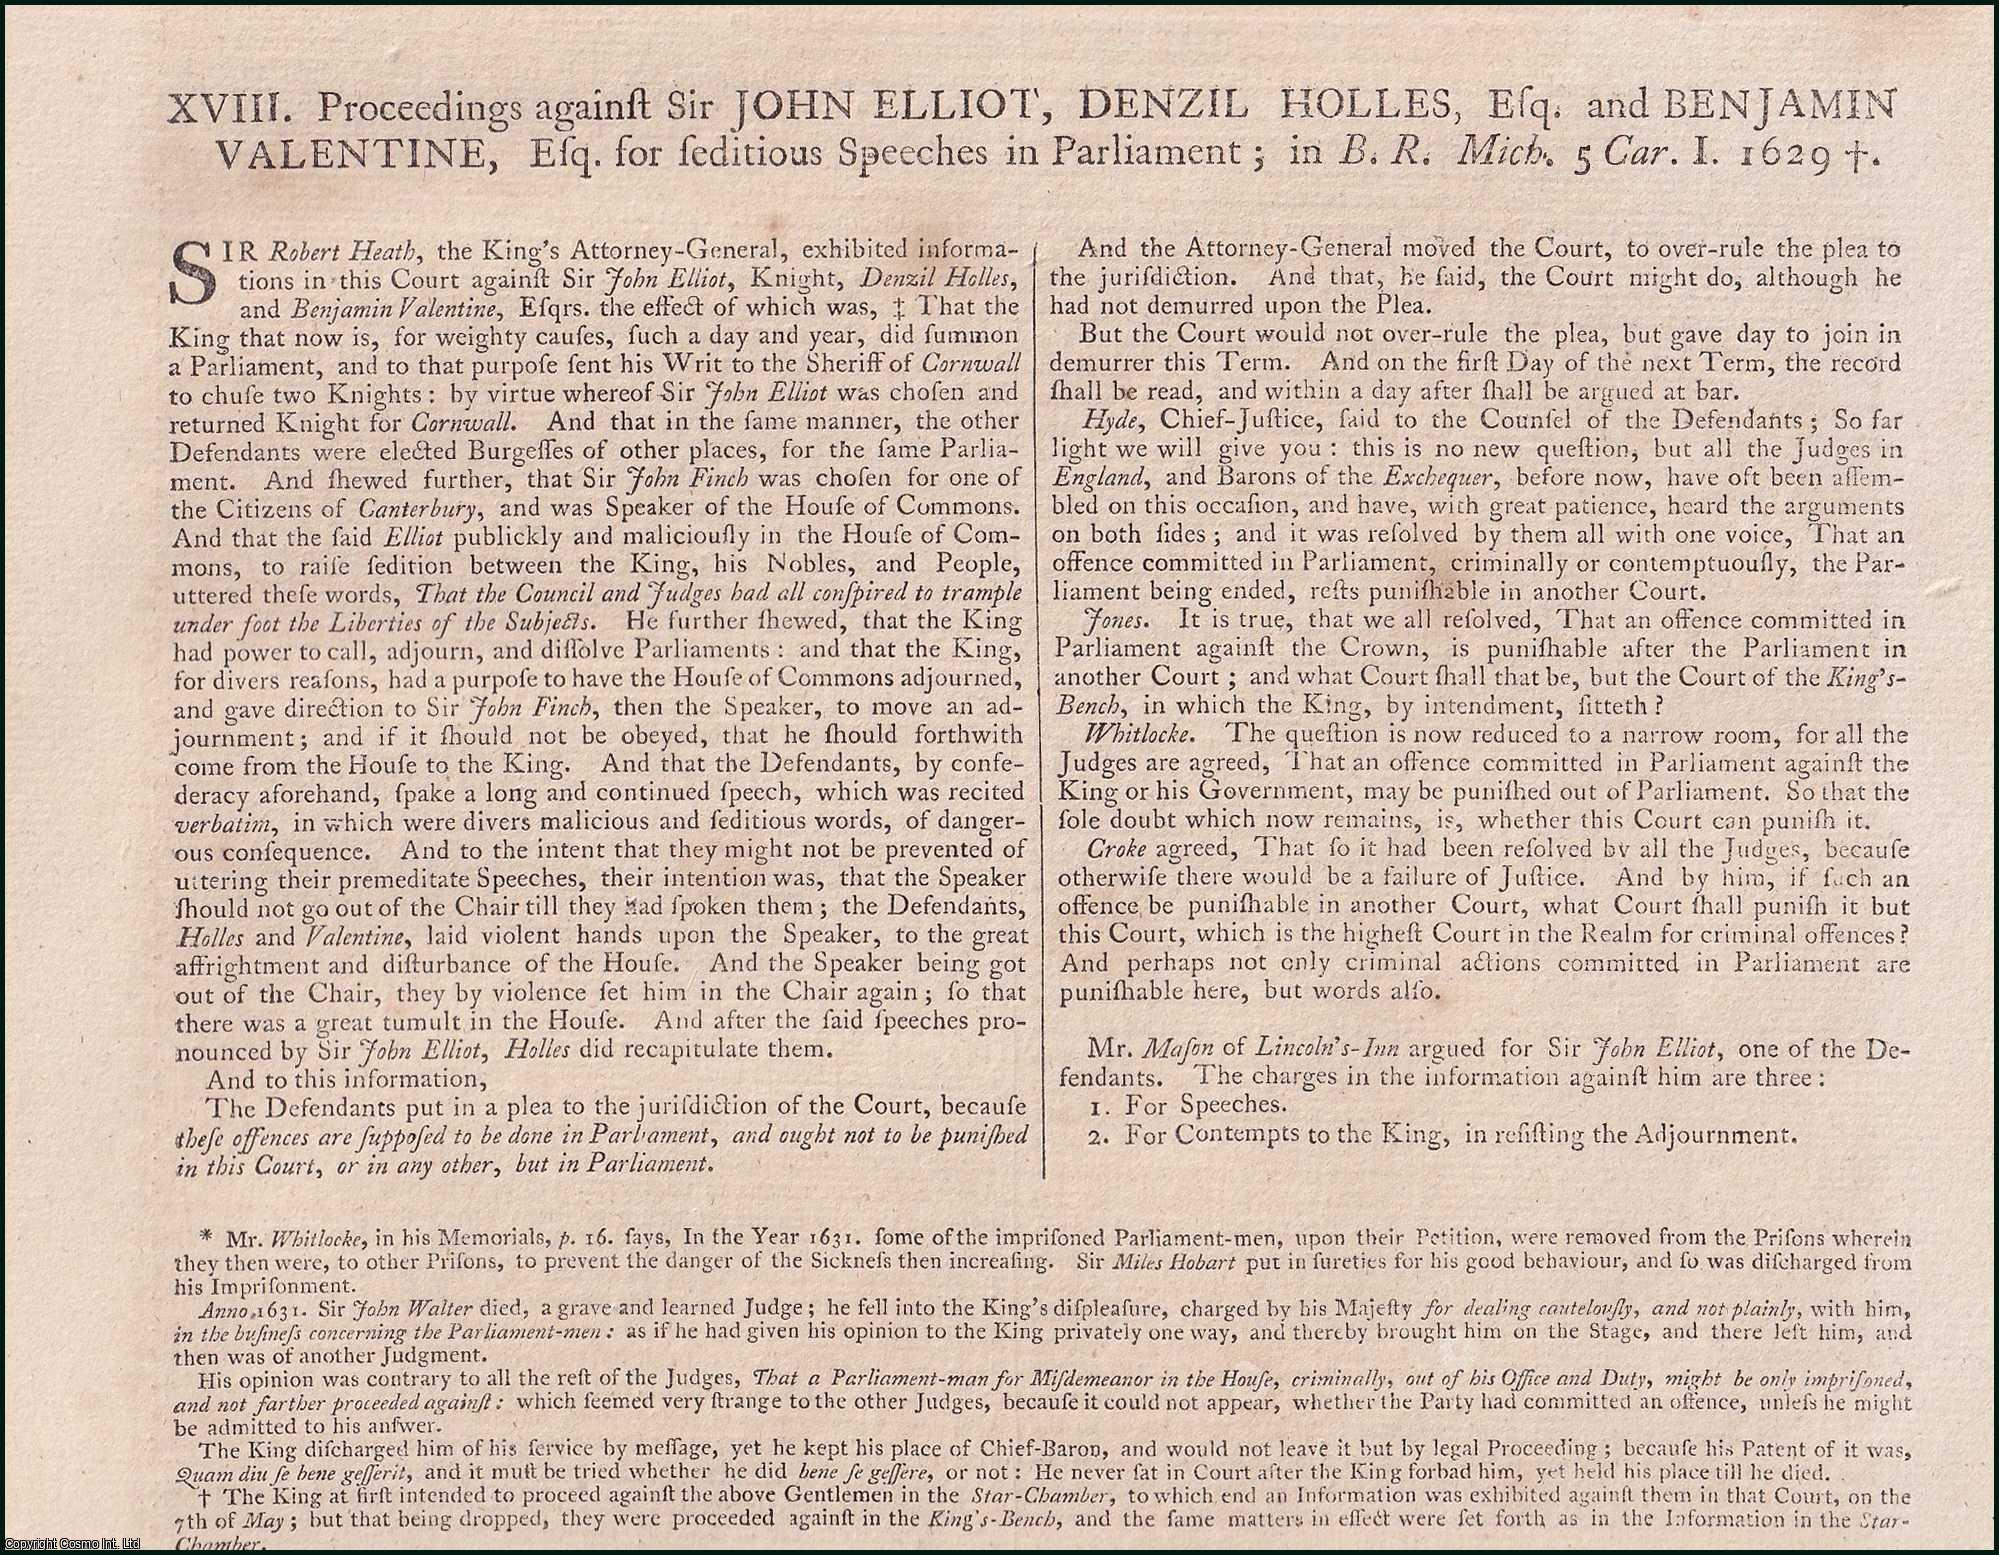 [Trial]. - Proceedings against Sir John Elliot, Denzil Holles, Esq. and Benjamin Valentine, Esq. for Seditious Speeches in Parliament, 1629. An original report from the Collected State Trials.